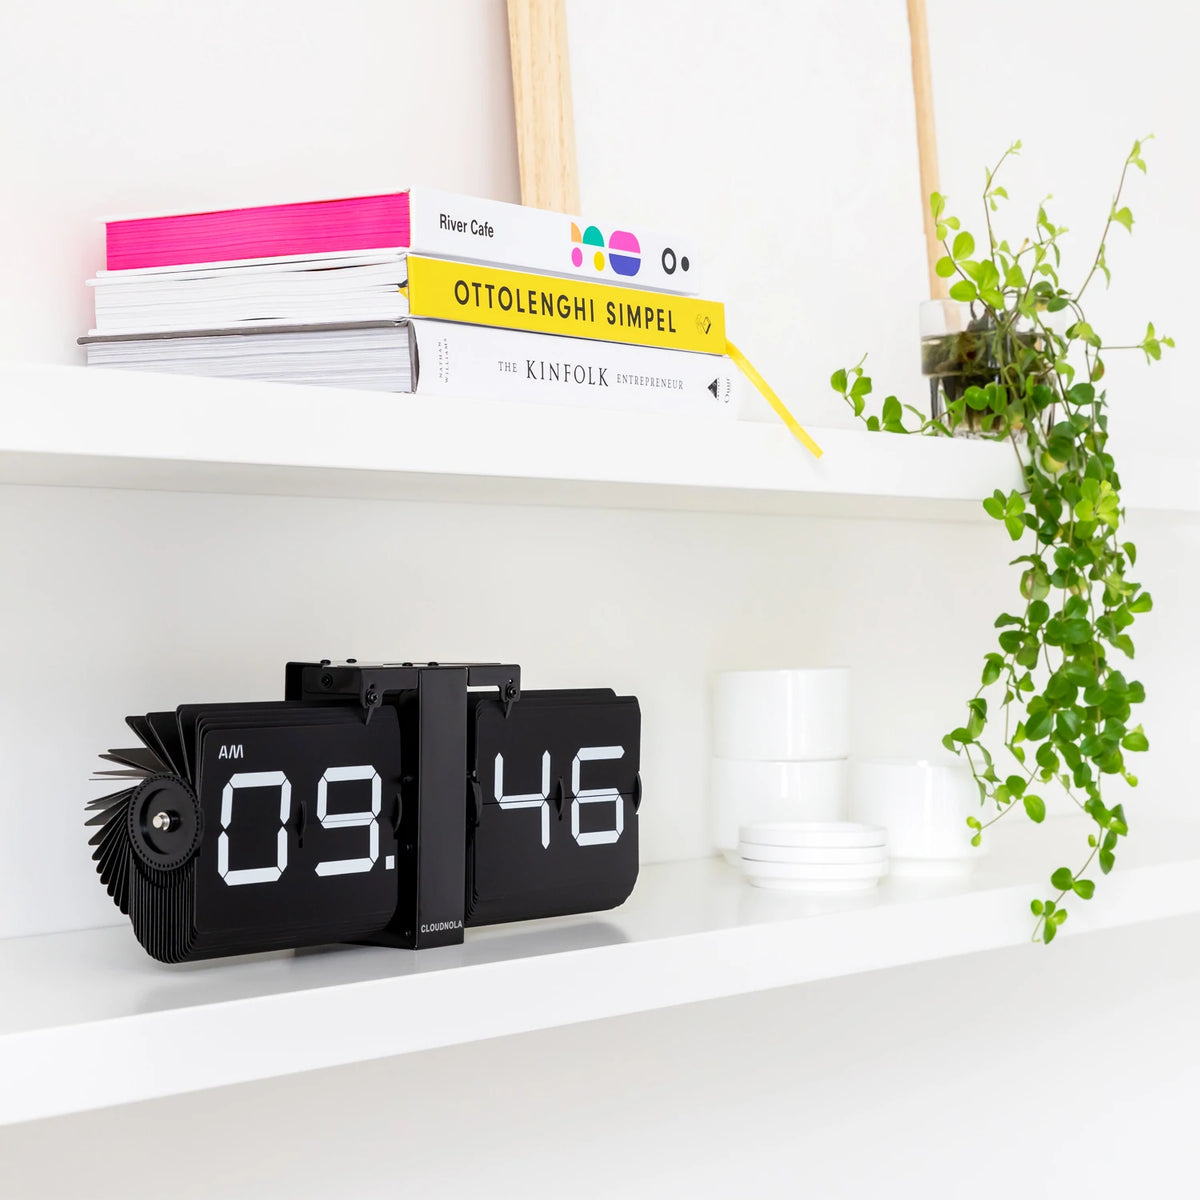 The Flipping Out Clock: Black displayed on a shelf with books and a plant.